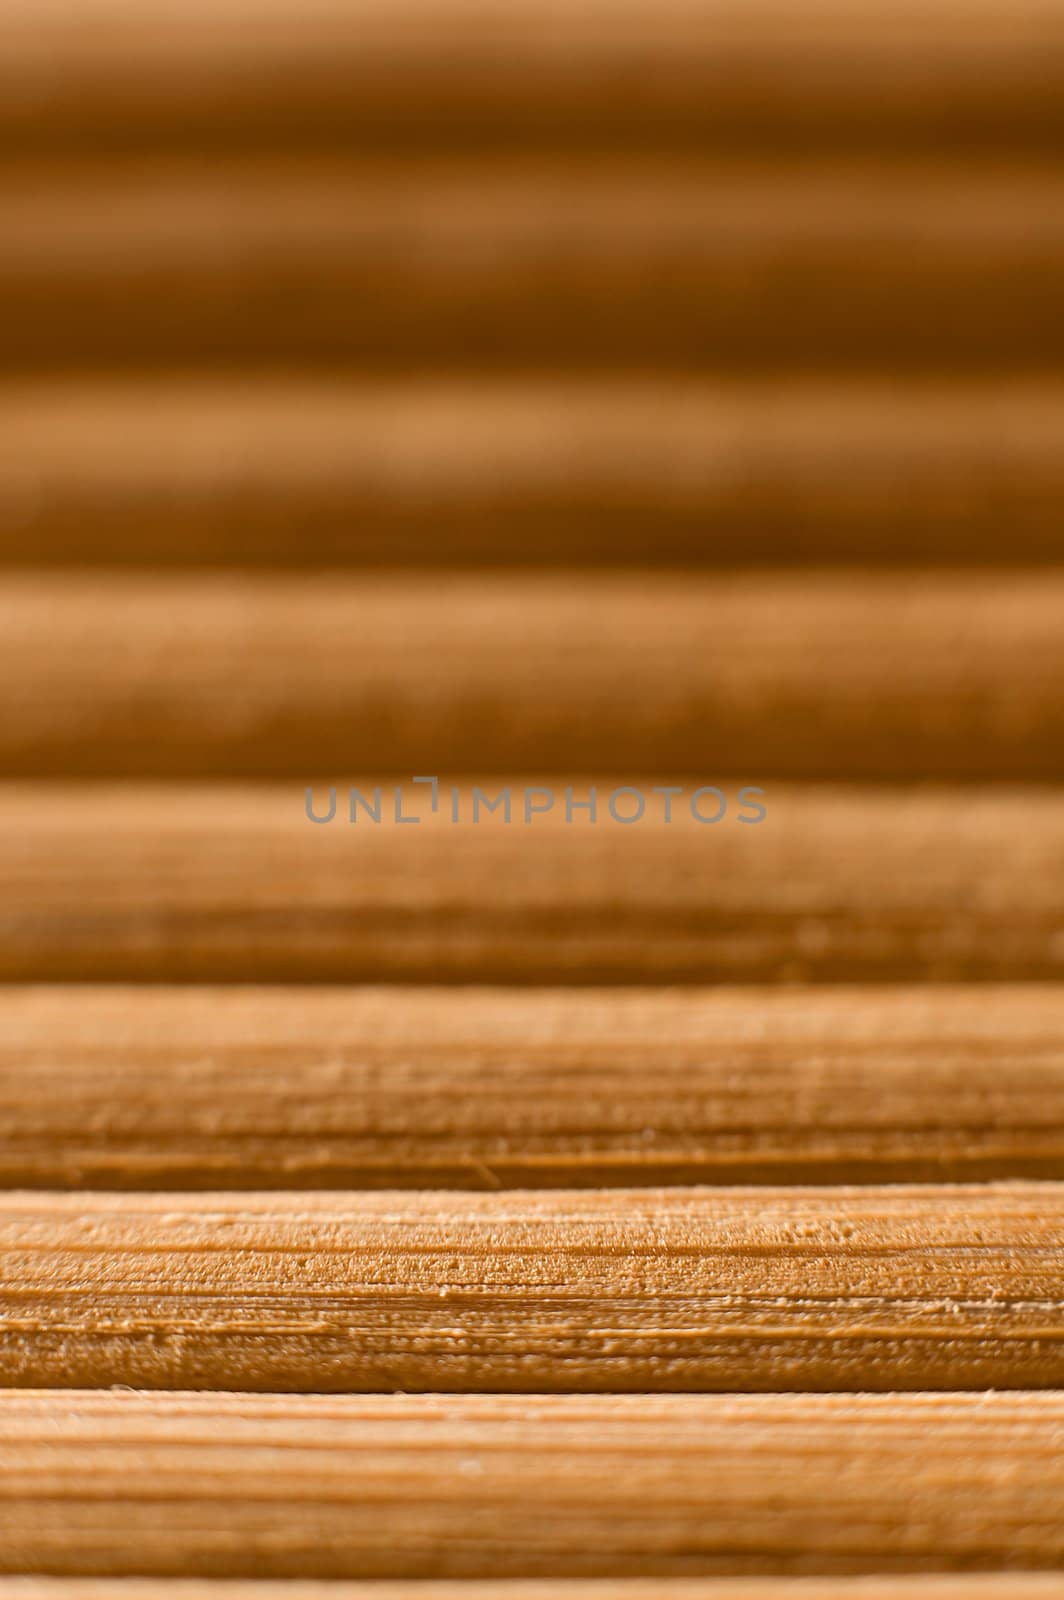 wooden plates detail abstract photo, can be used as background